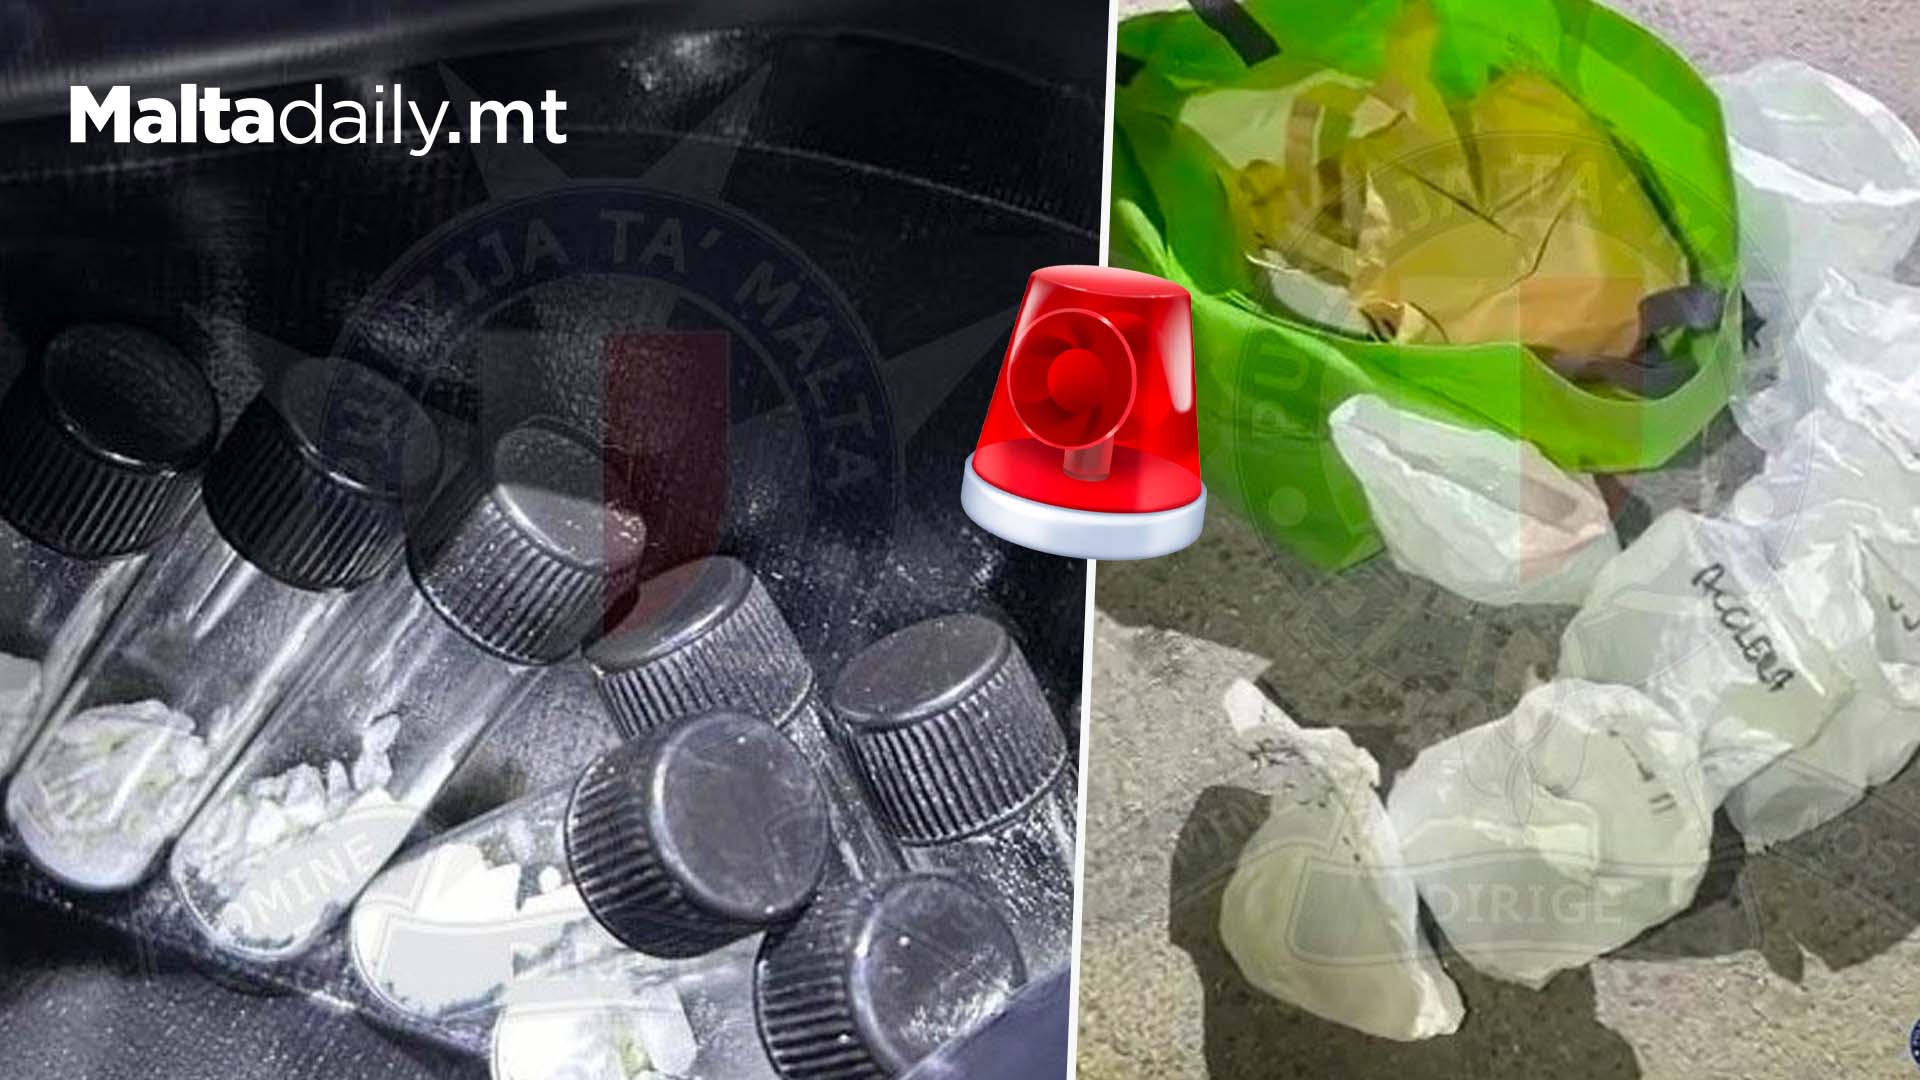 MDMA, Cocaine And Weed In Traffic Drug Bust